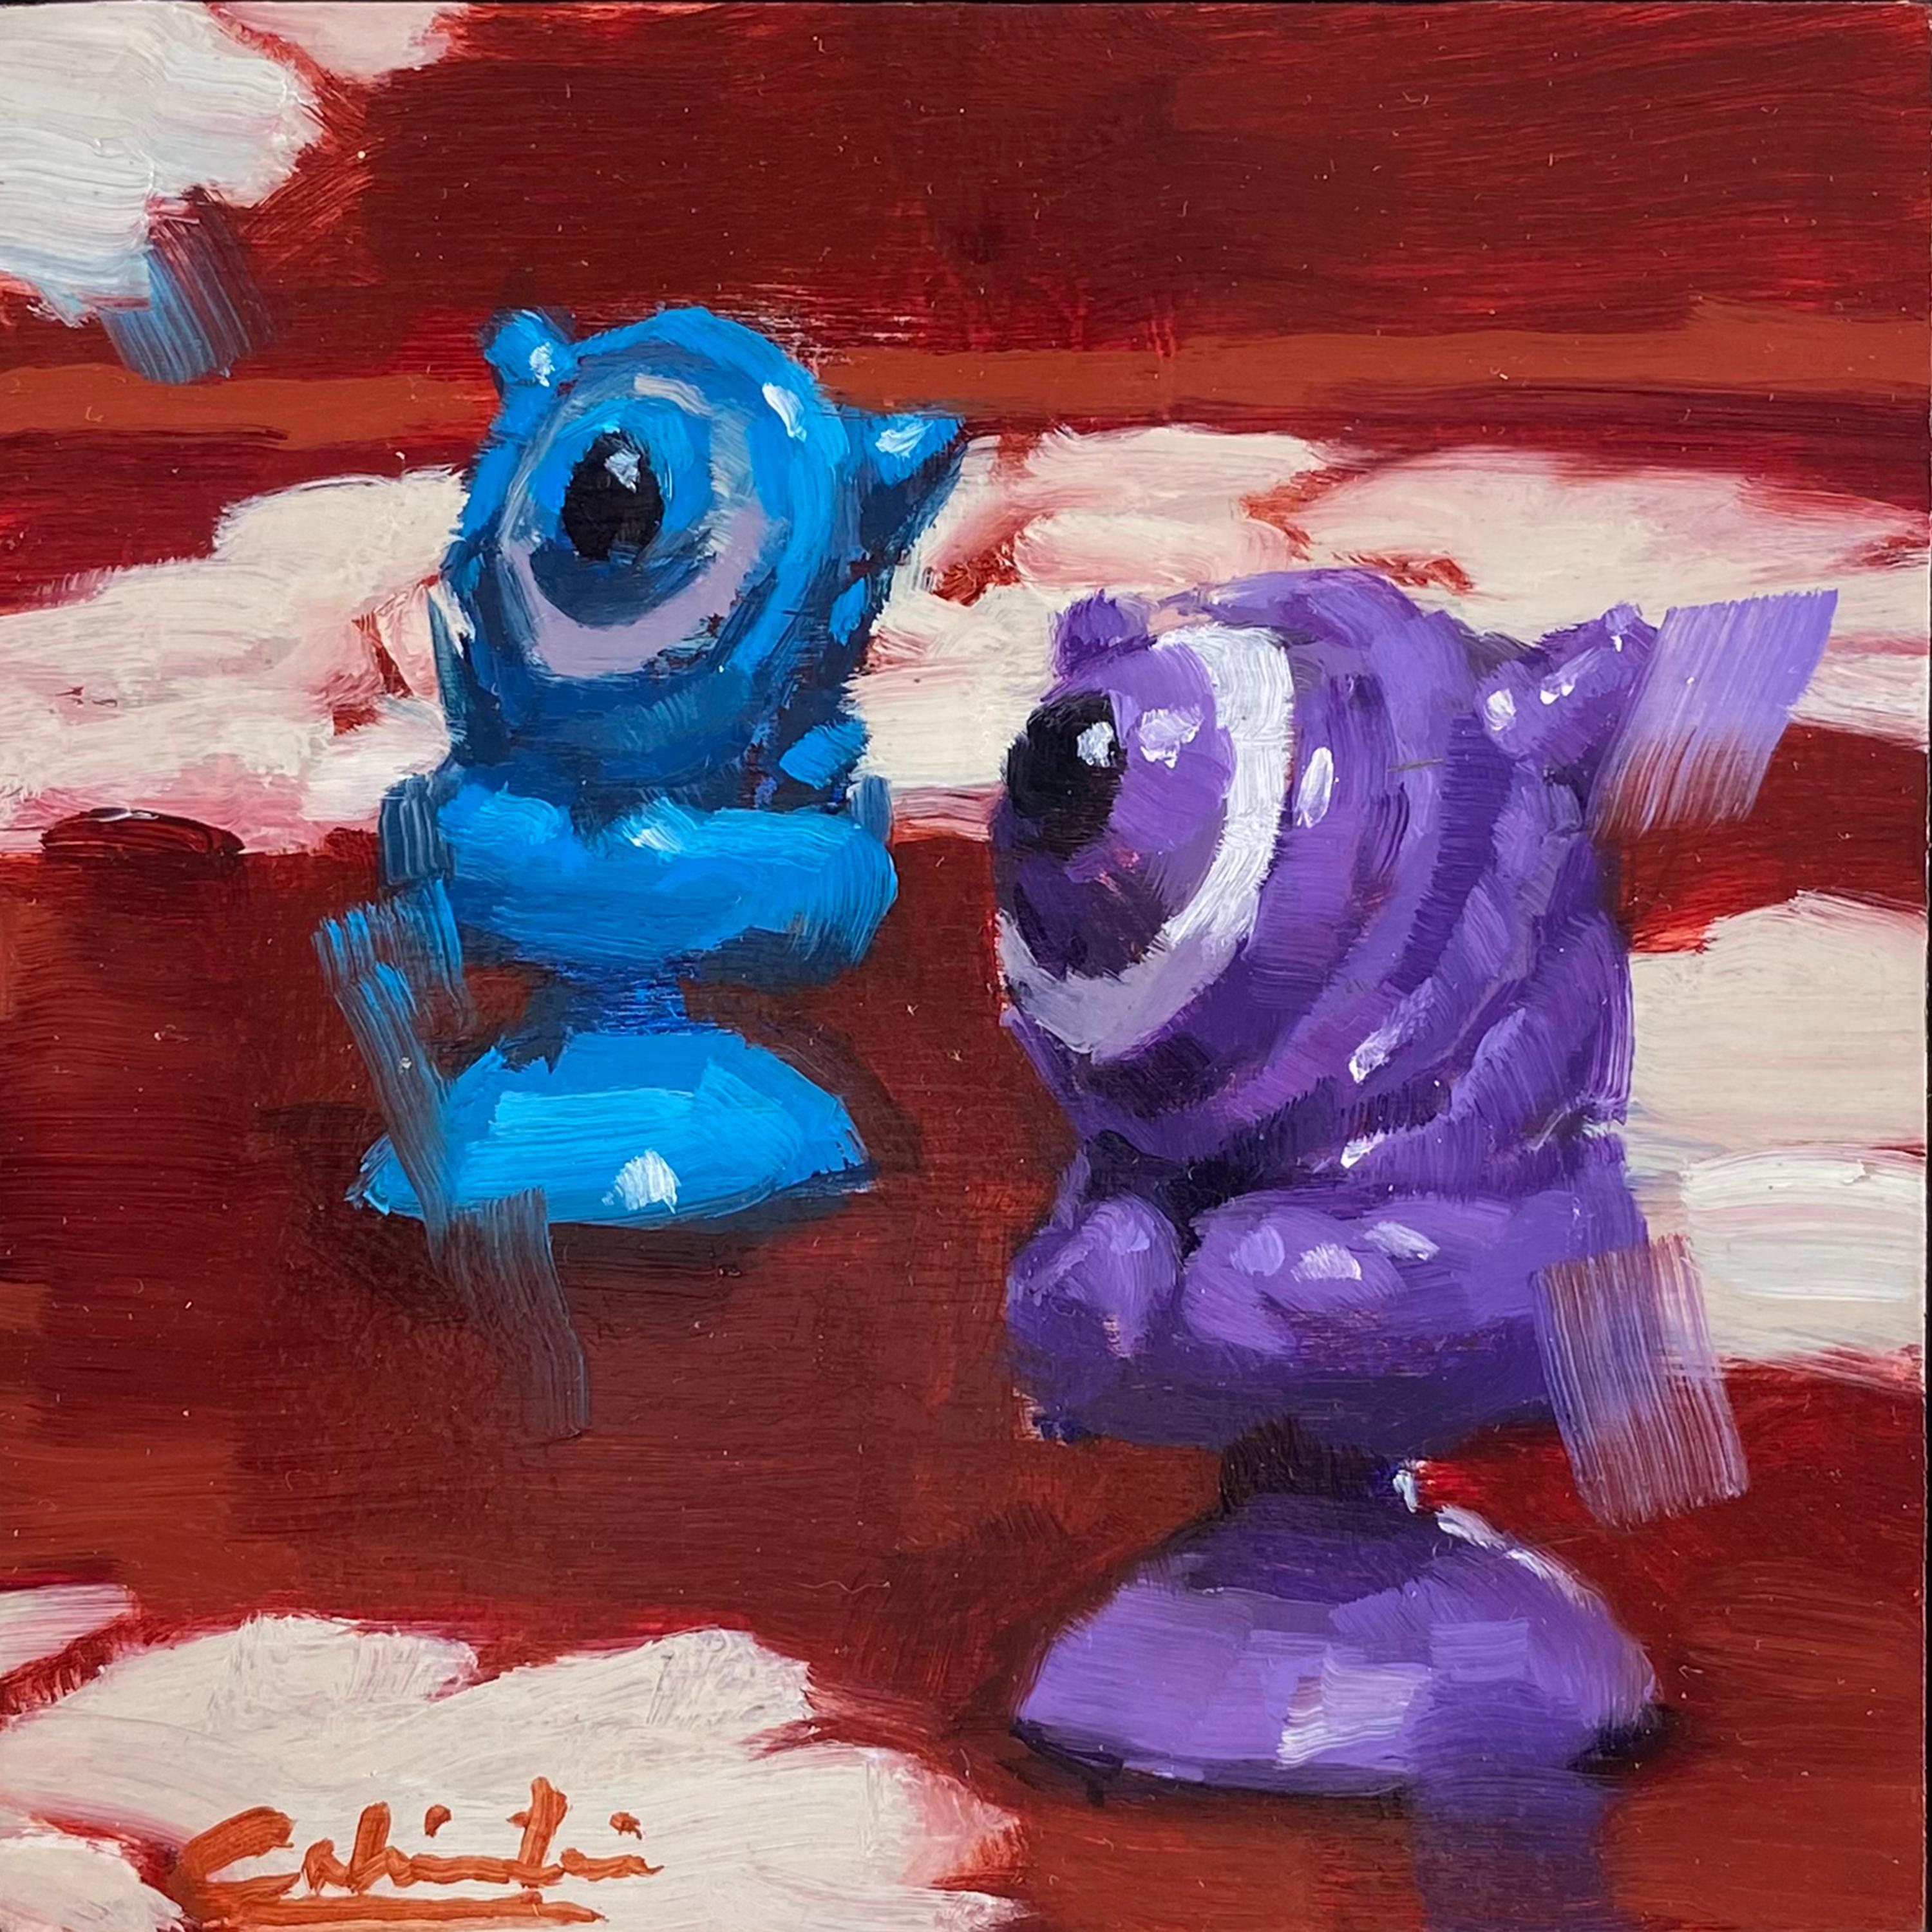 Calvin Lai Figurative Painting - "Little Aliens" Oil Painting Colorful Toys